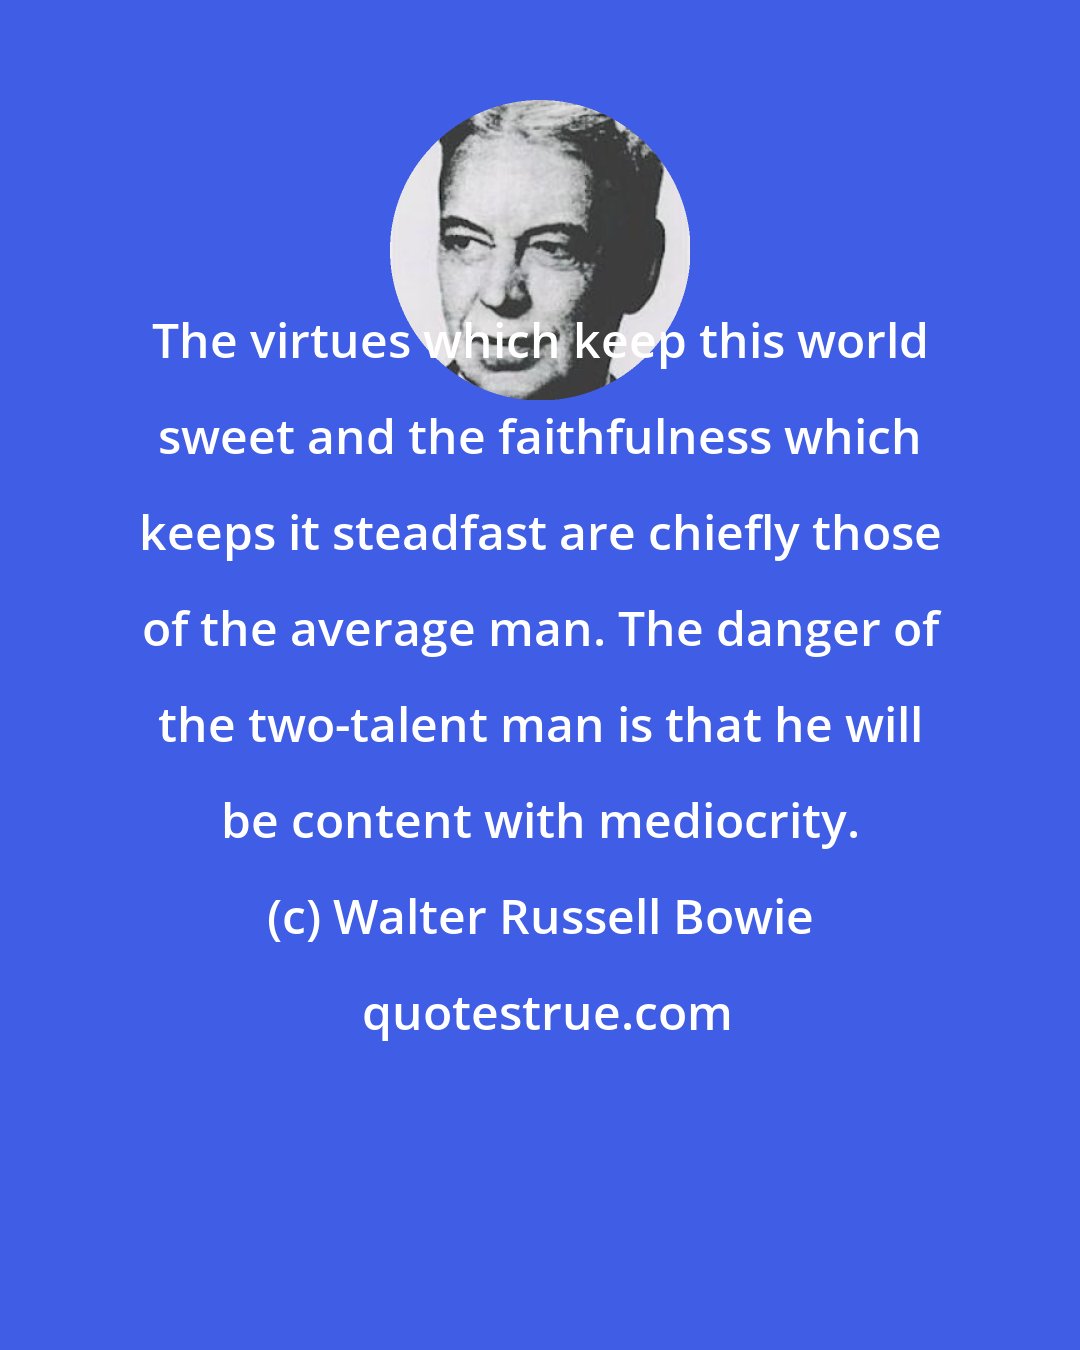 Walter Russell Bowie: The virtues which keep this world sweet and the faithfulness which keeps it steadfast are chiefly those of the average man. The danger of the two-talent man is that he will be content with mediocrity.